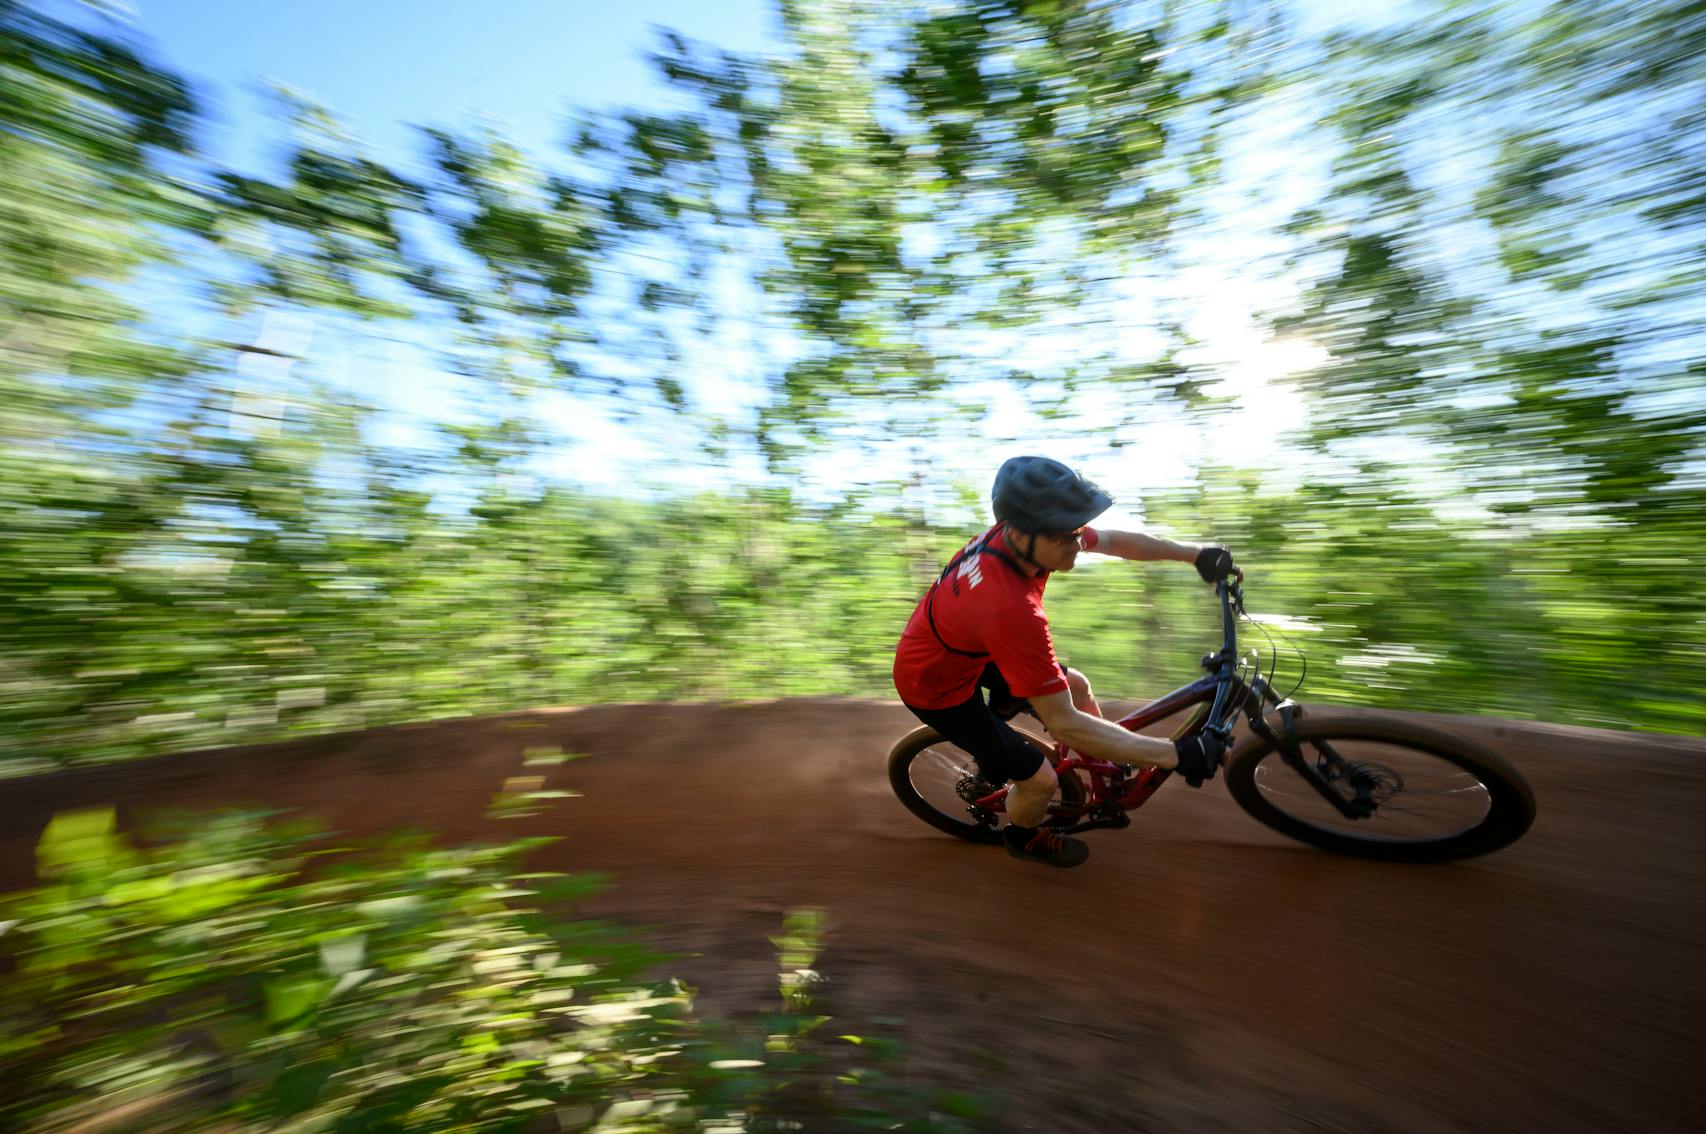 Chuck Carlson navigated a low bank on Roly Poly. He and his wife, Sue, are teachers in the Brainerd area and avid mountain bikers.